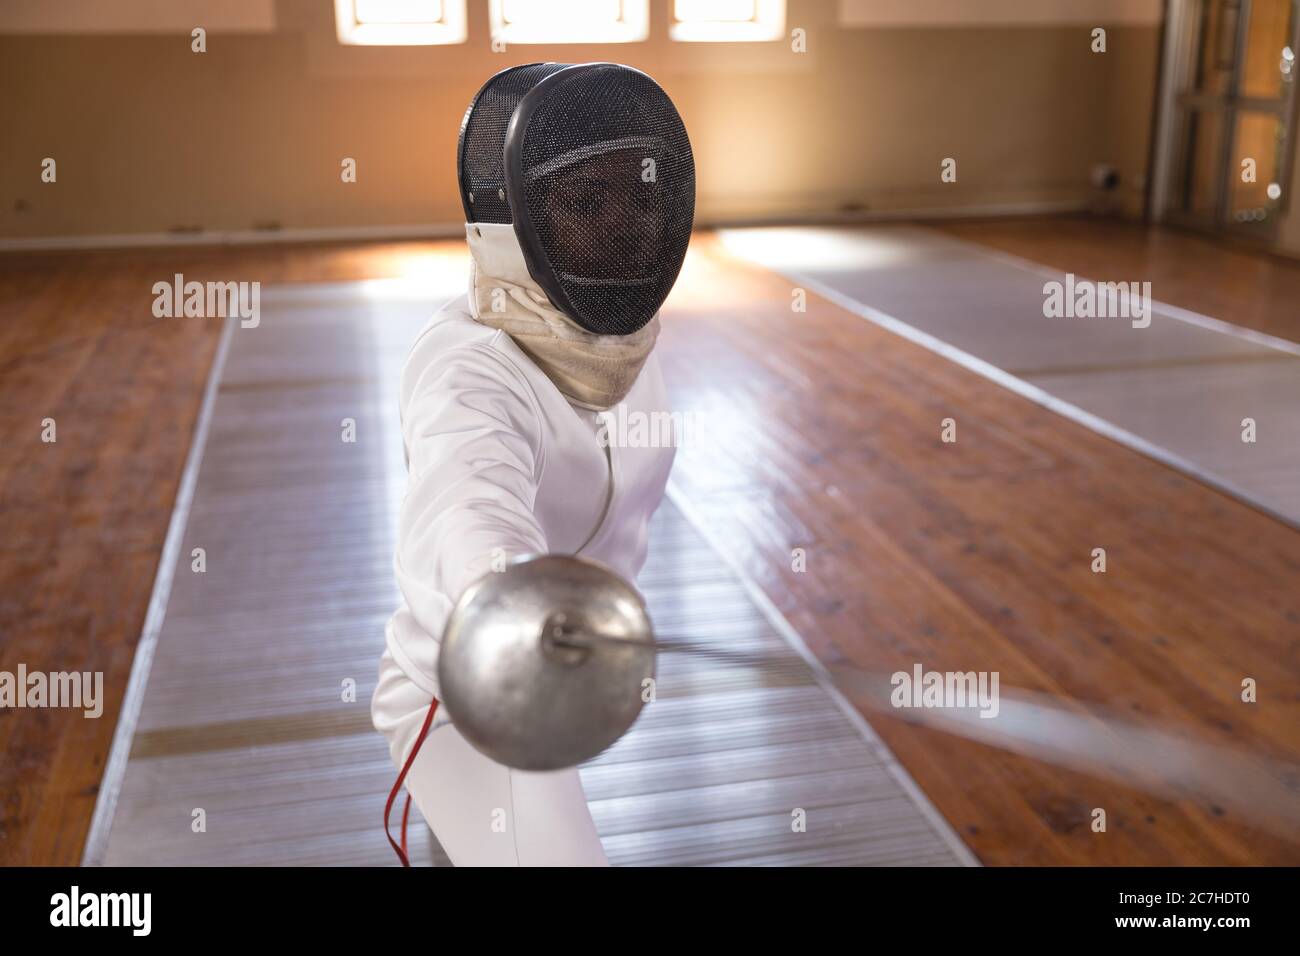 Female fencer practicing fencing Stock Photo